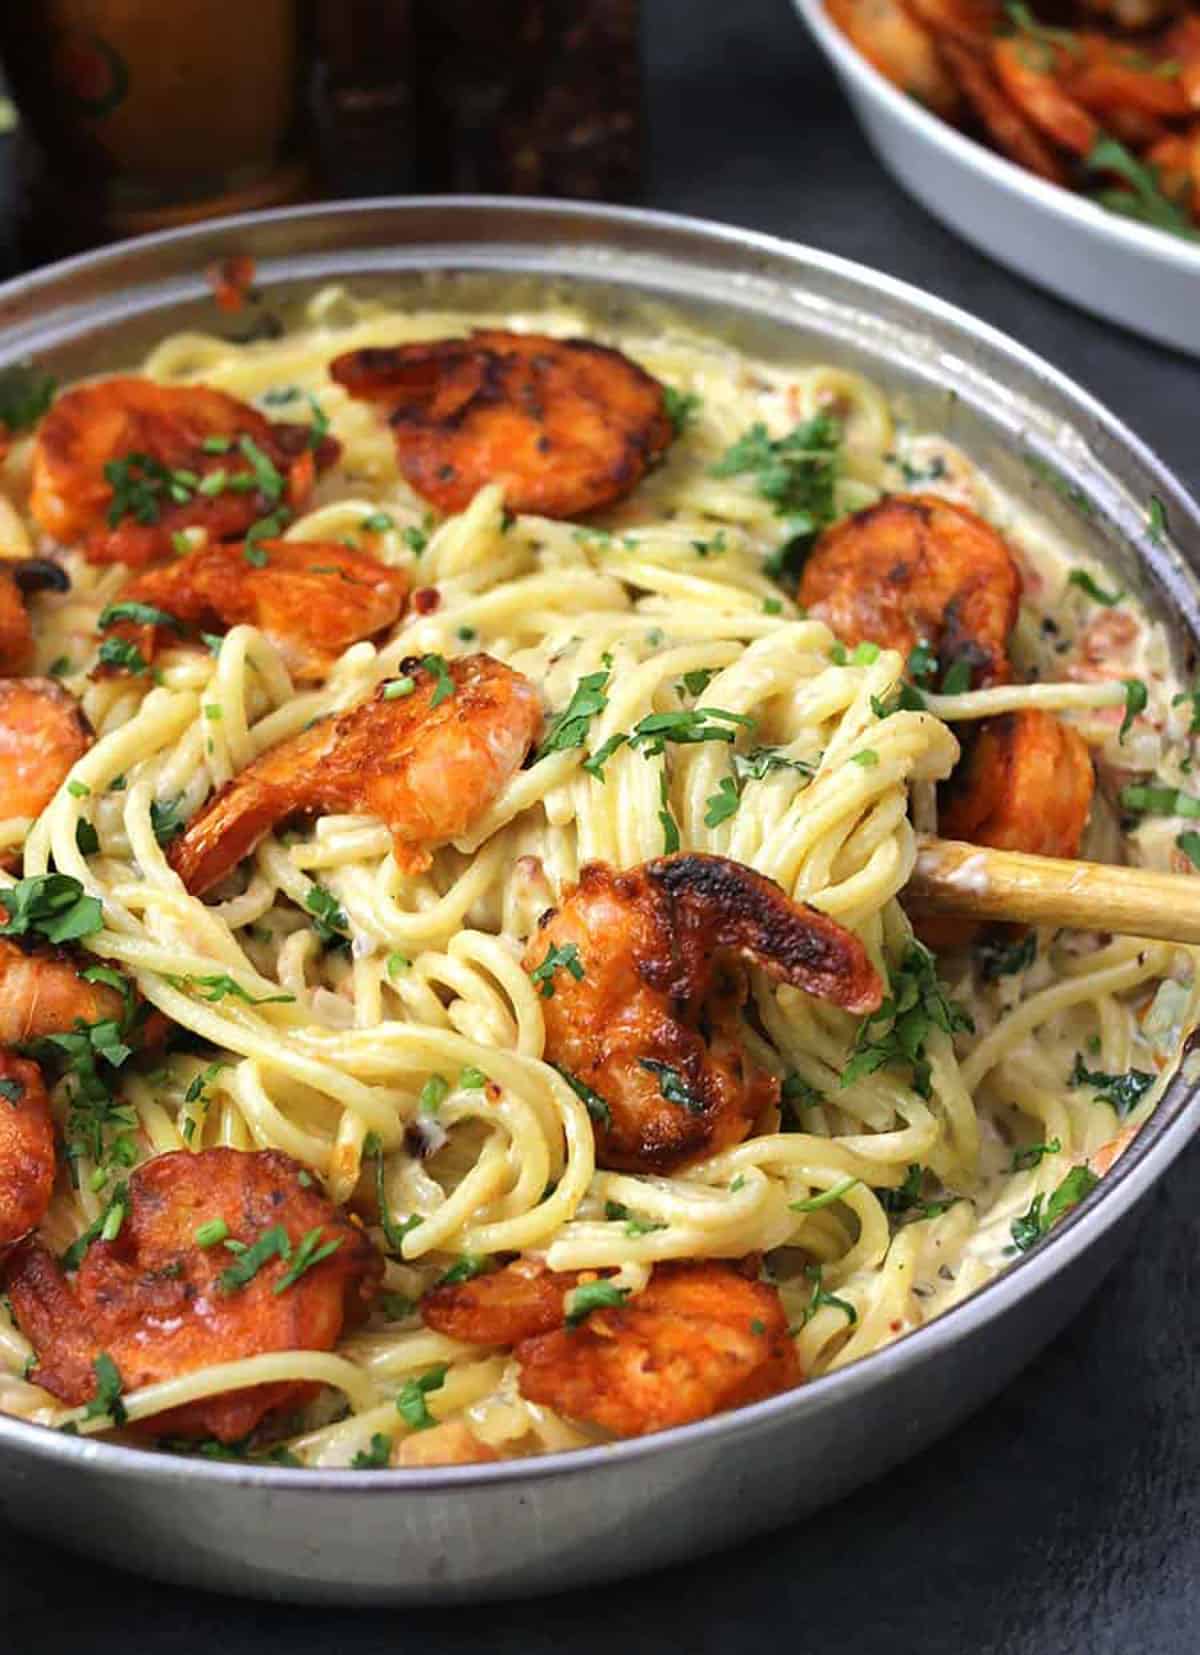 Bistro-style perfect shrimp scampi with linguini about to be served from a pan using wooden spatula.